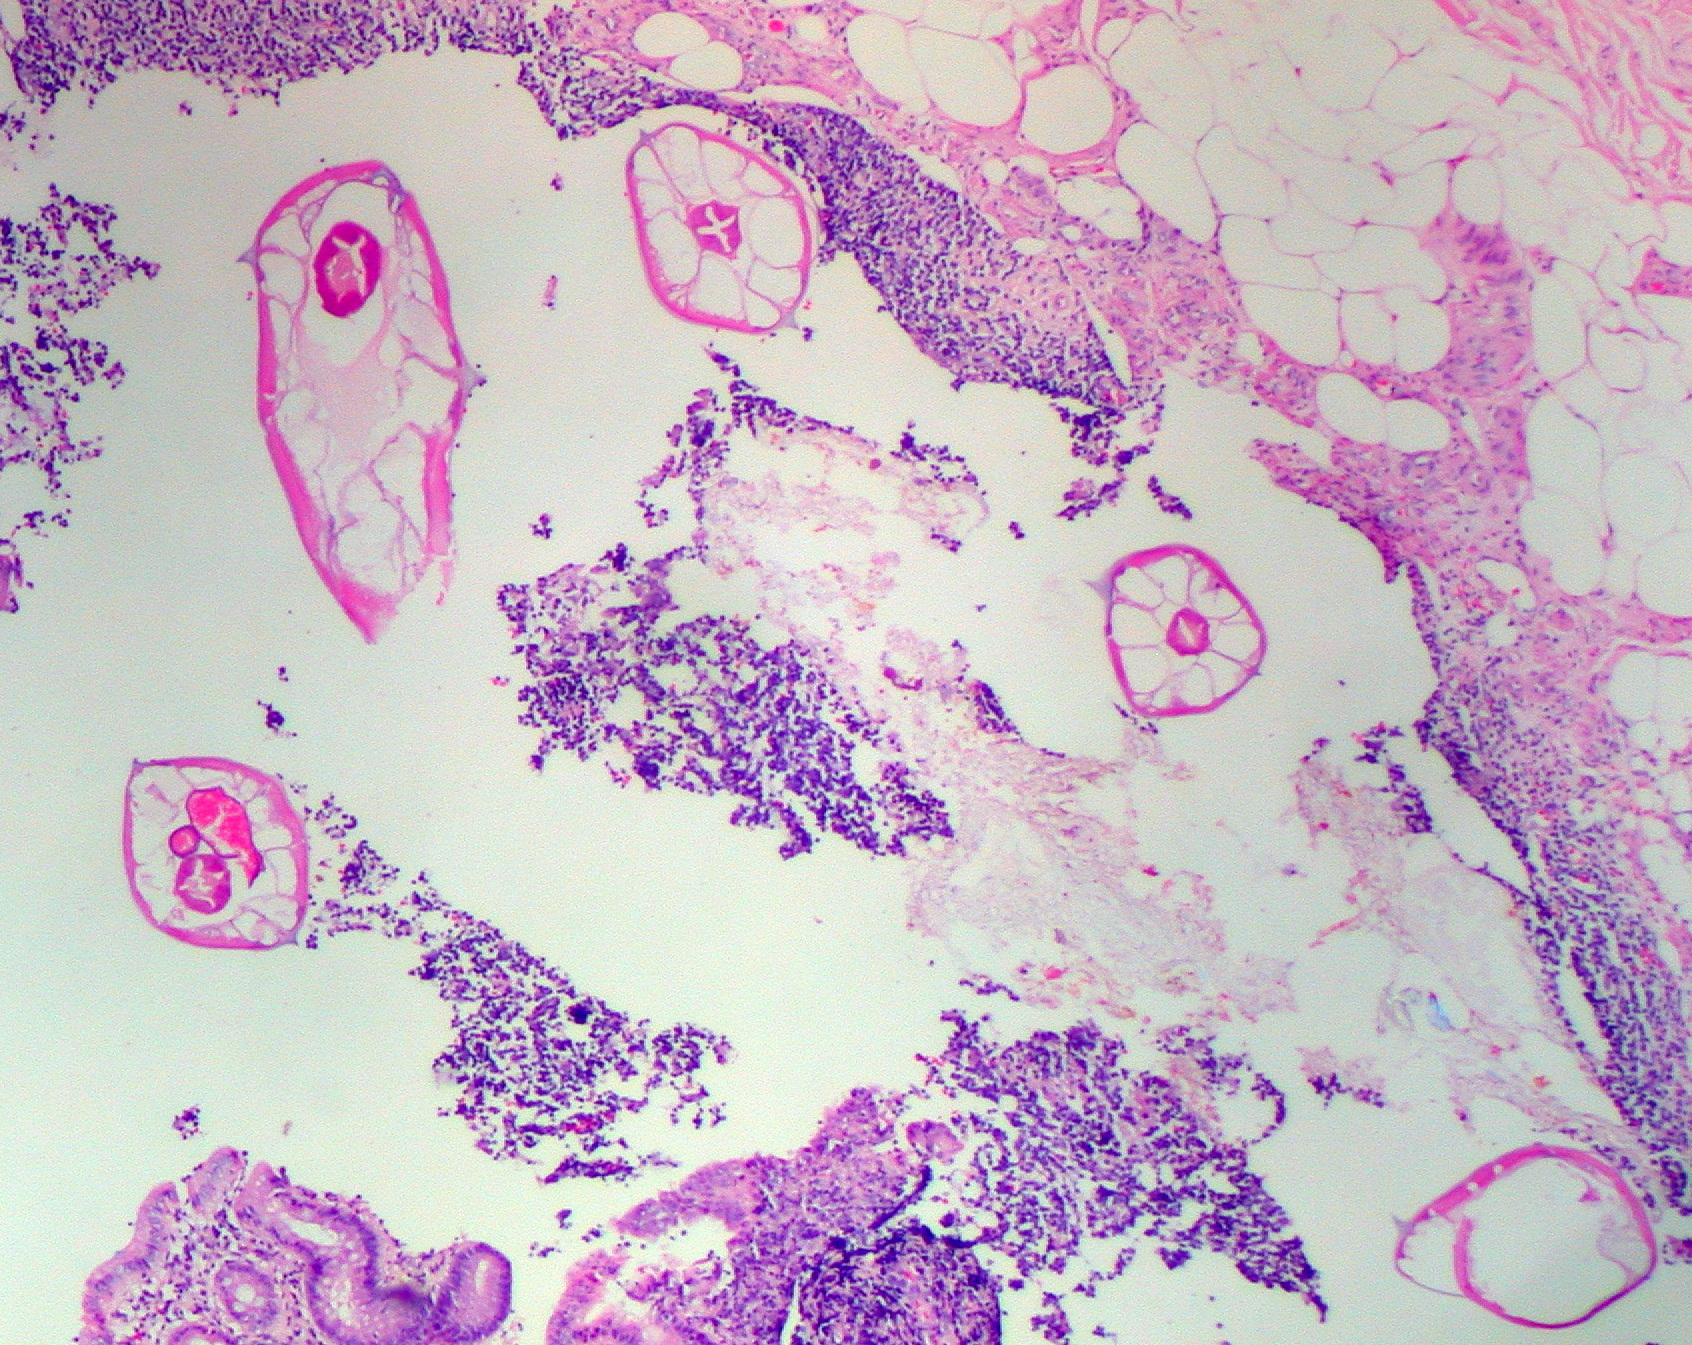 Pinworms are sometimes diagnosed incidentally by pathology. Micrograph of pinworms in the appendix. H&E stain.